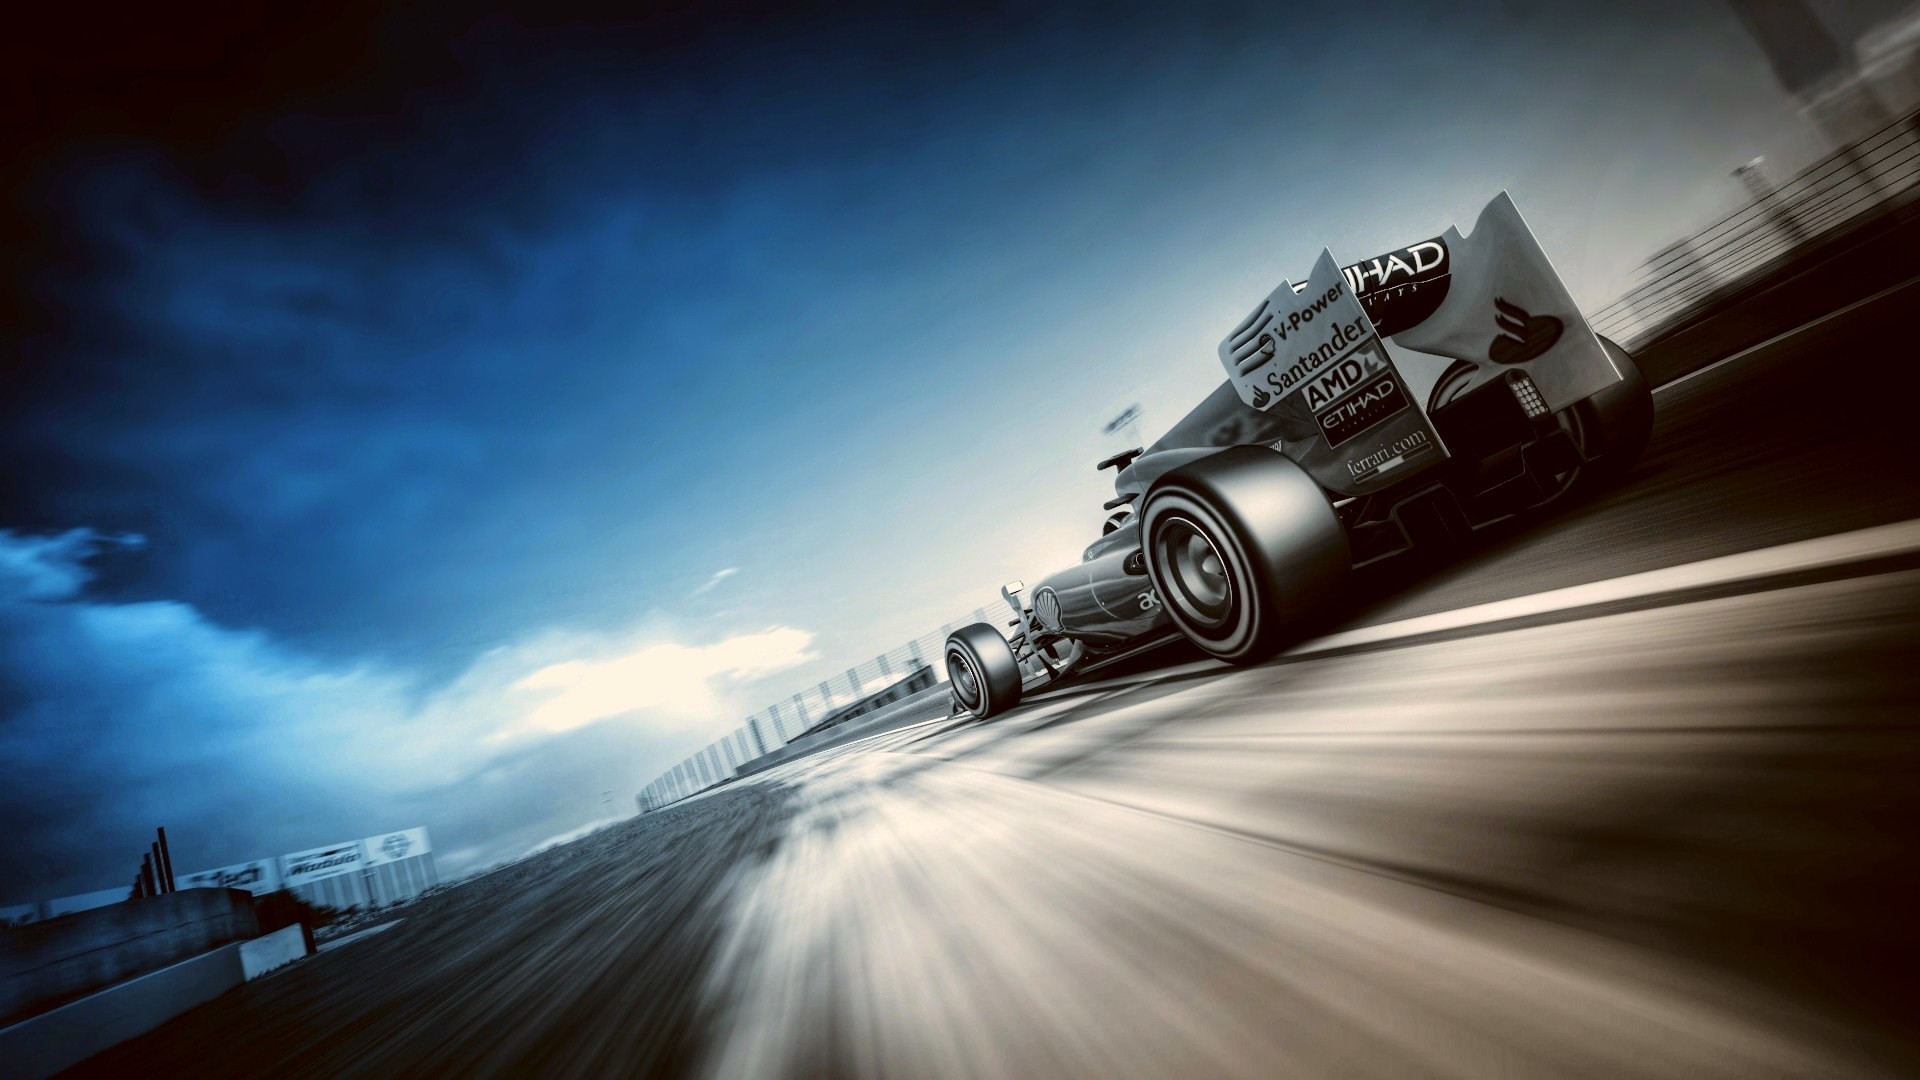 1920x1080 Free Formula One Car HD Wallpaper because theDesktop Background Image for  yourportable computer, Macintosh or pc.